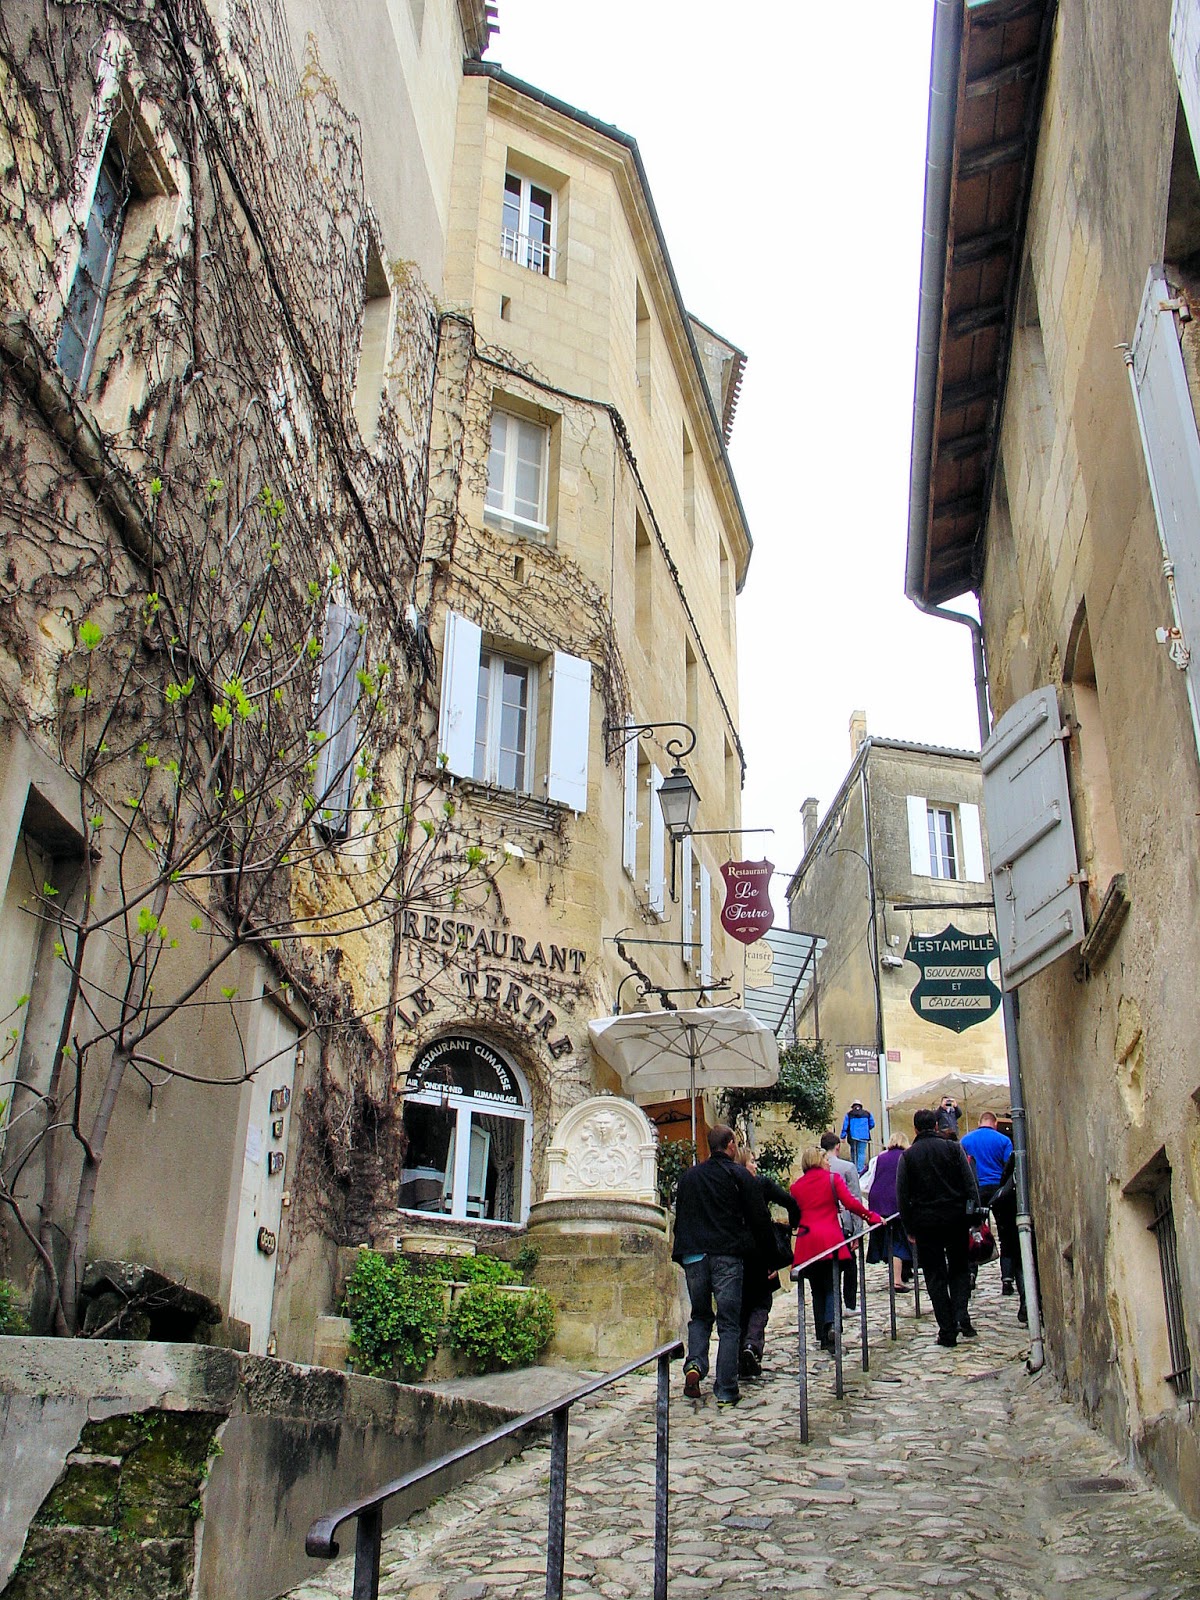 Look at the slope of this cobbled hill in Saint-Émilion. Quaint narrow lanes lined with medieval architecture are home to enchanting cafés and shops.